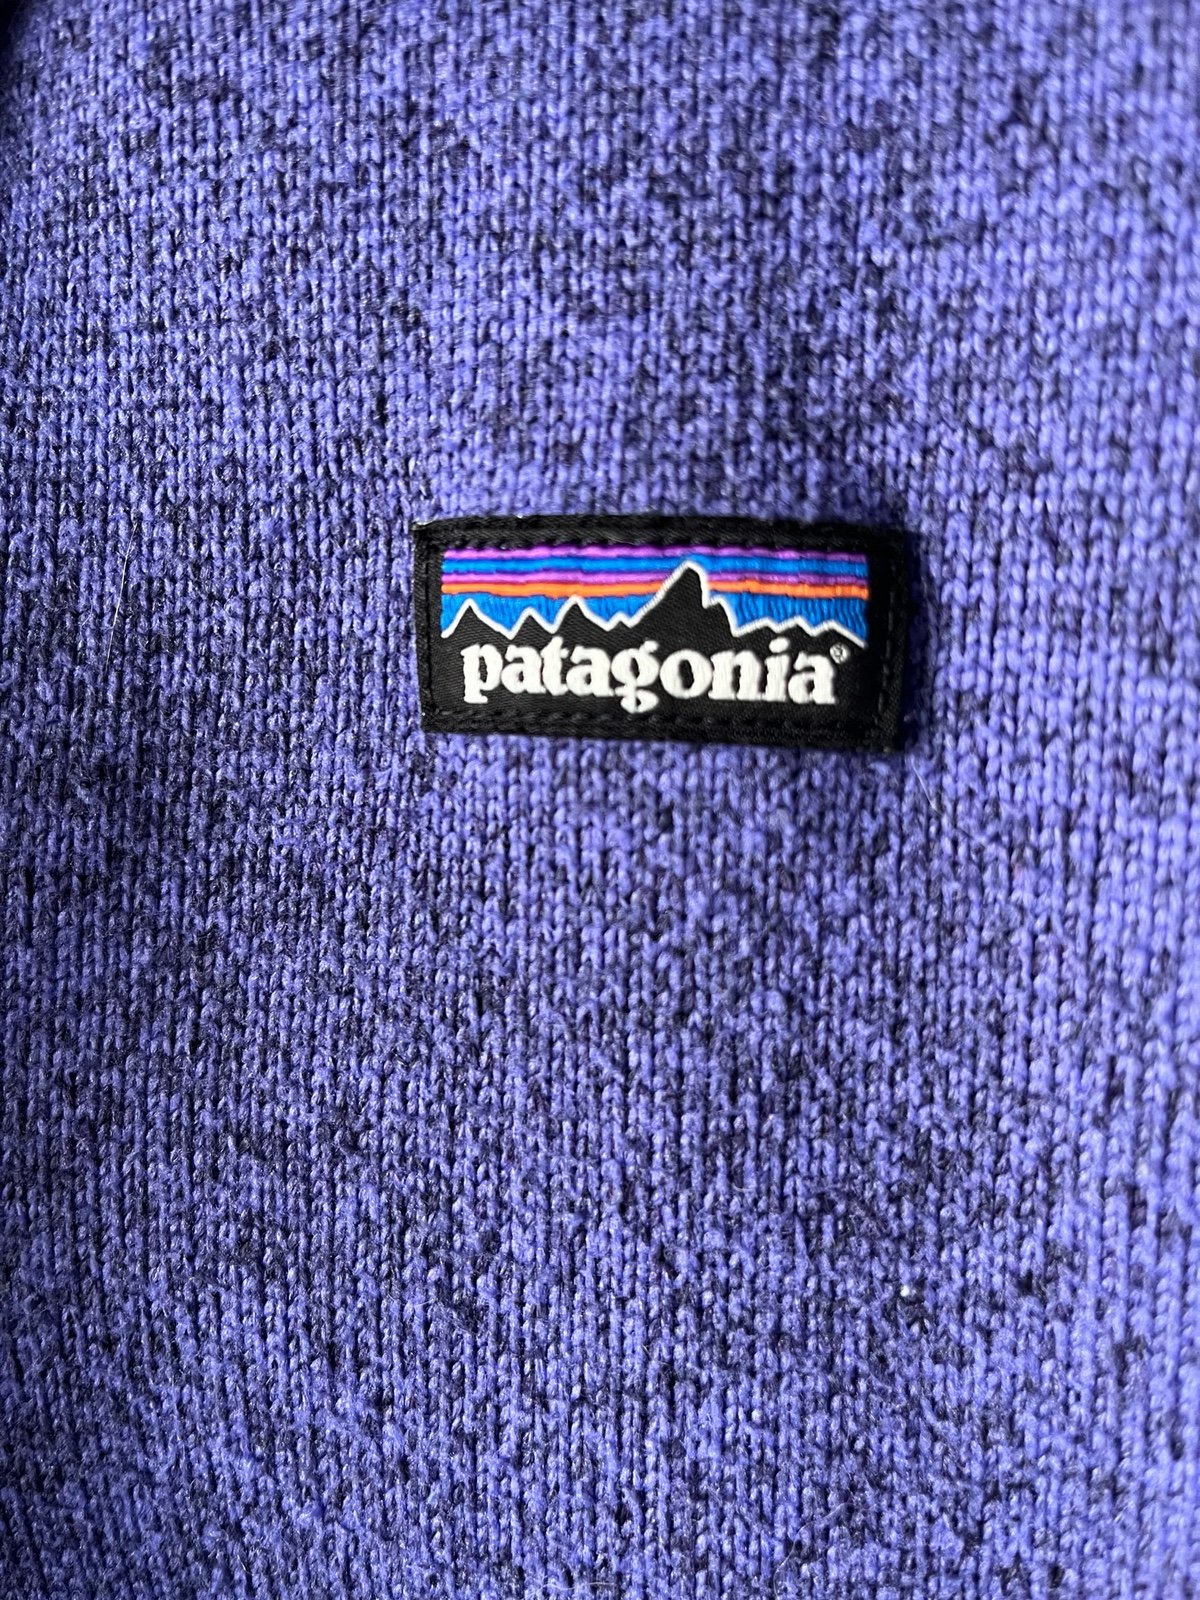 reasonable price Patagonia Better Sweater 1/4 Zip Fleece Pullover kQ9vhstHZ US Outlet